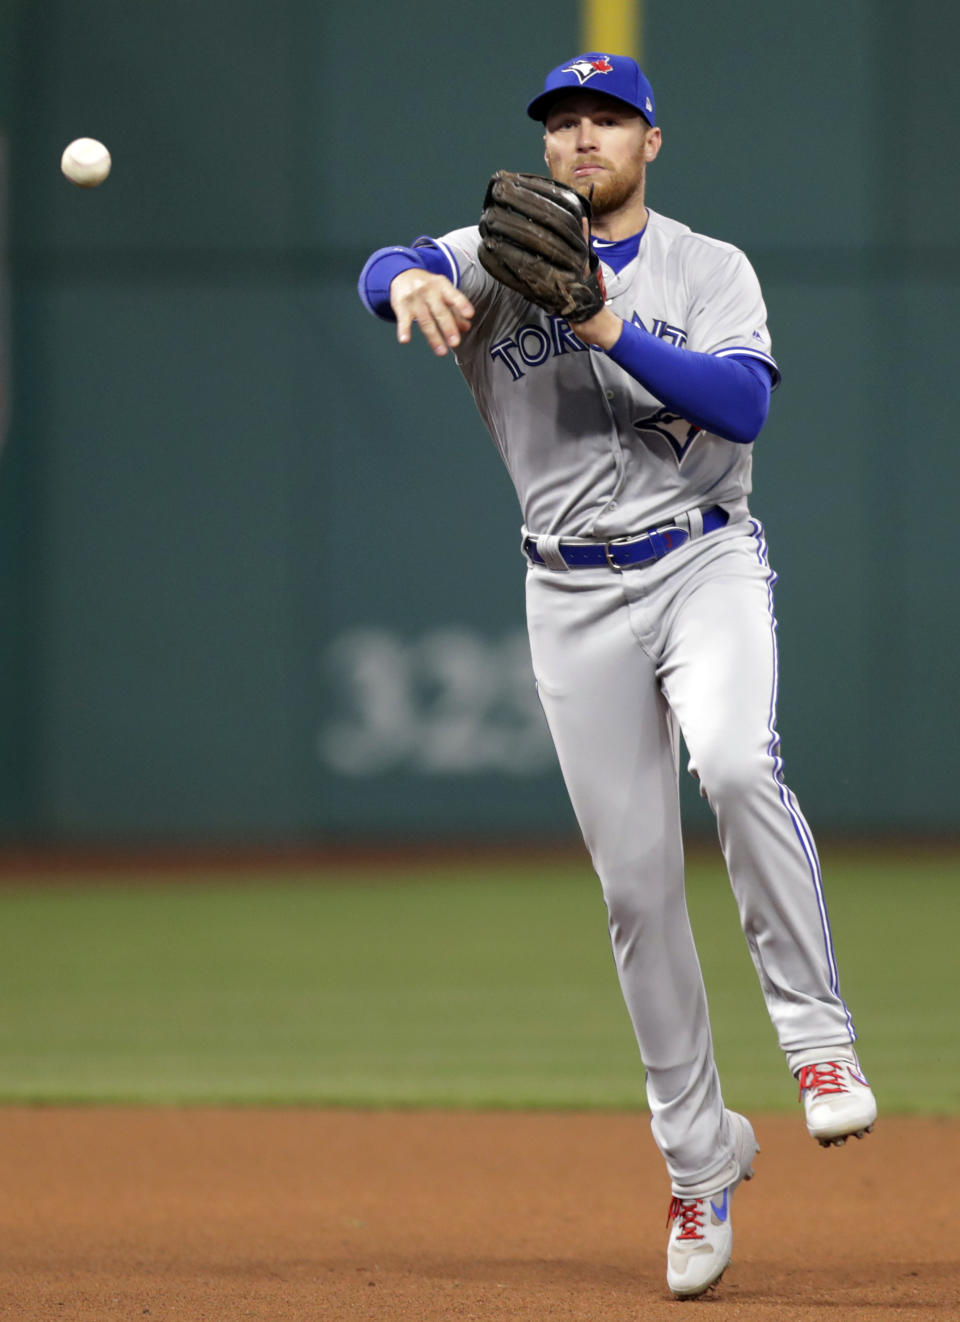 Toronto Blue Jays' Freddy Galvis throws out Cleveland Indians' Carlos Santana at first base during the fourth inning of a baseball game Friday, April 5, 2019, in Cleveland. (AP Photo/Tony Dejak)